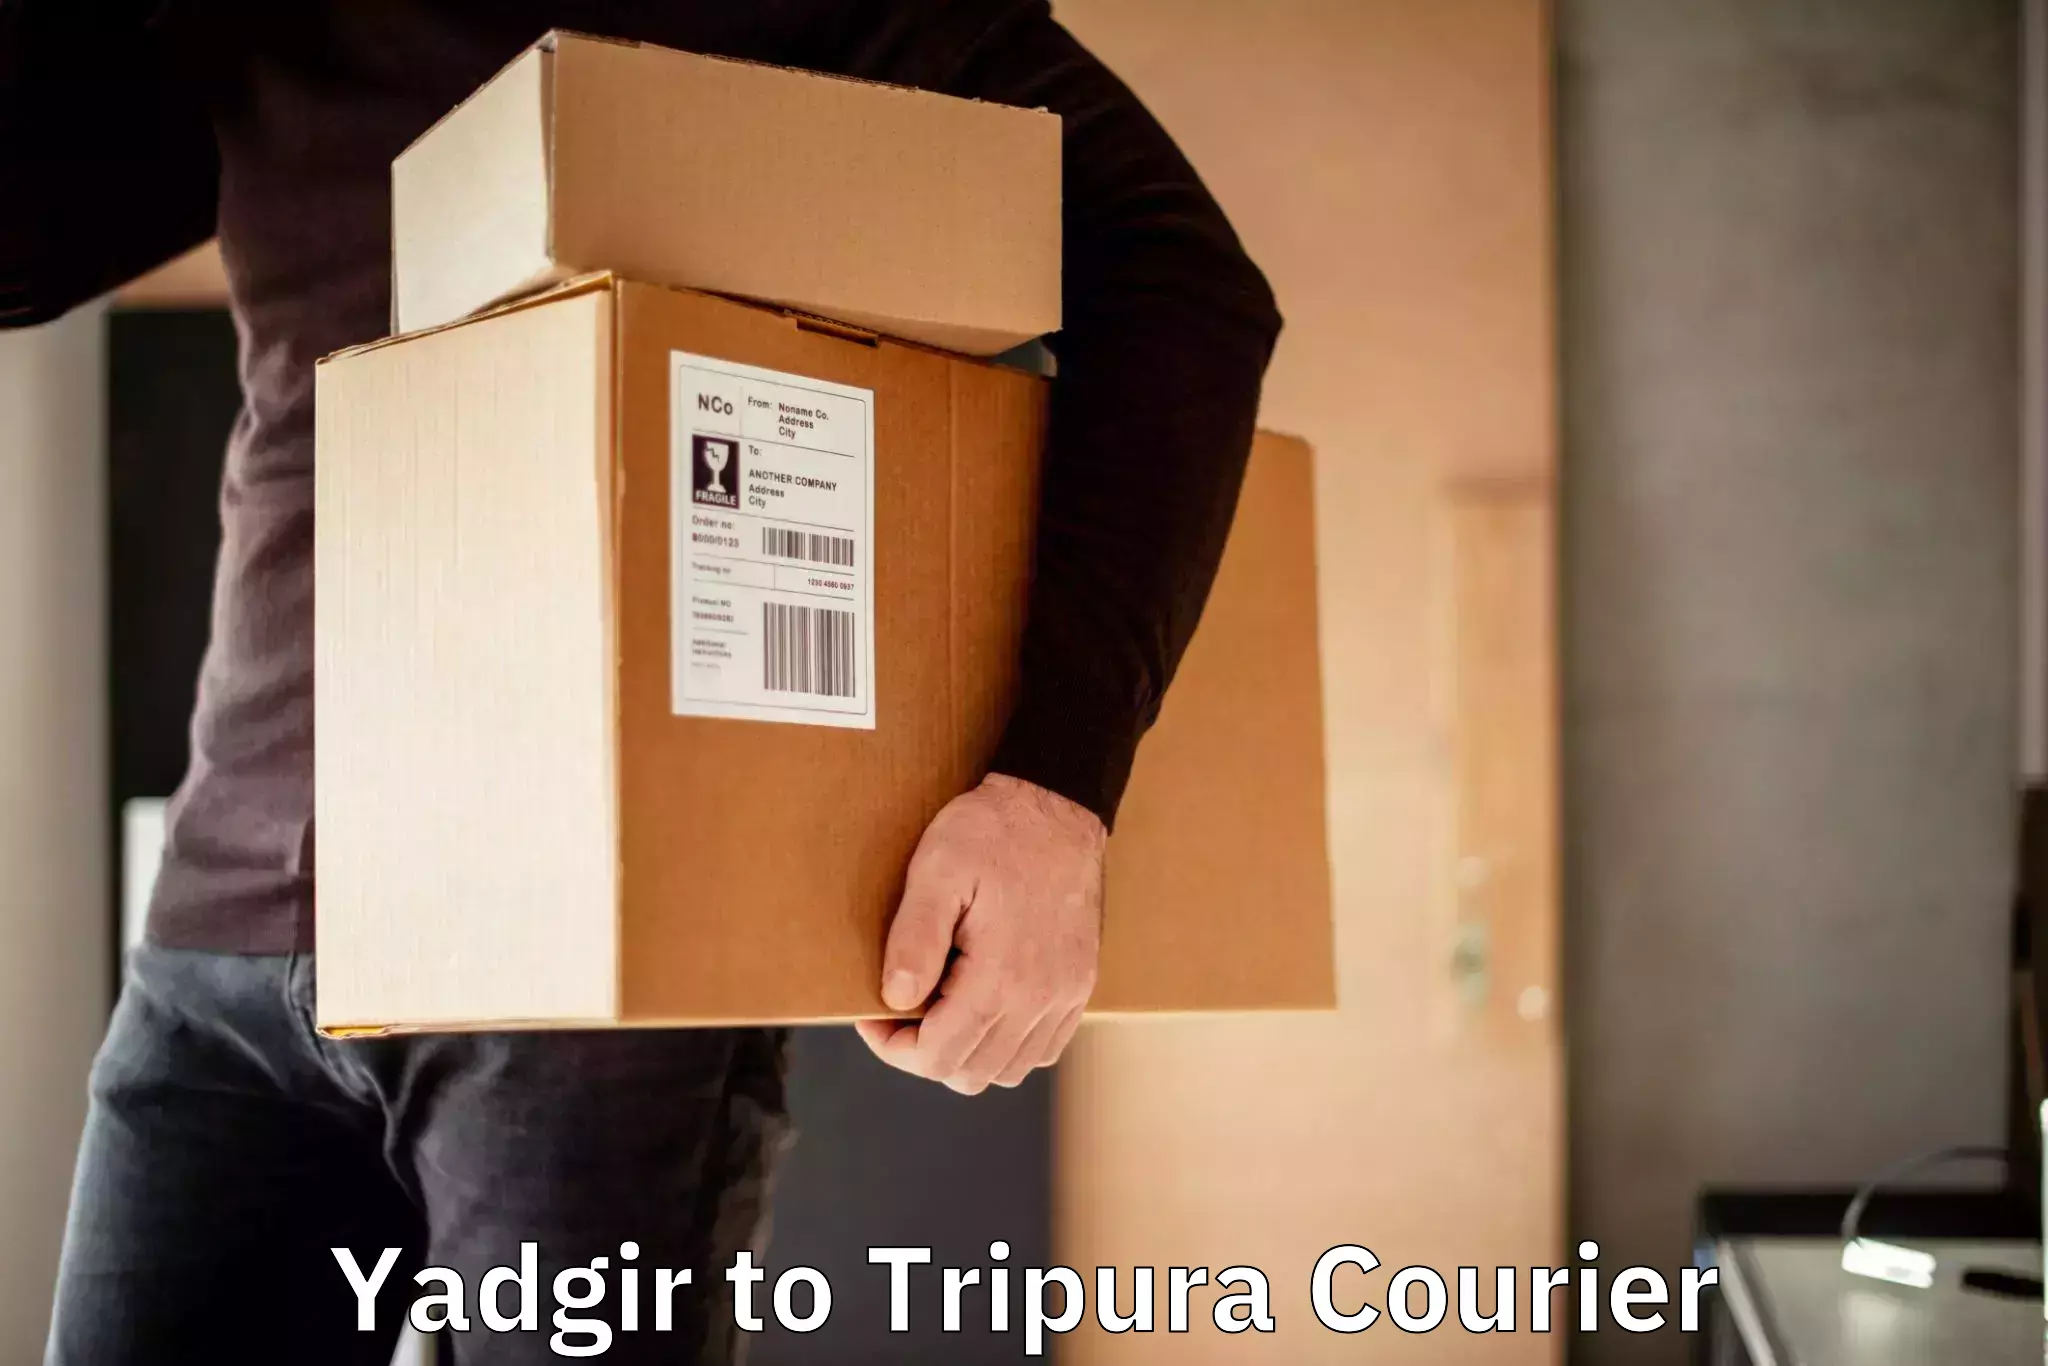 Supply chain delivery Yadgir to Udaipur Tripura